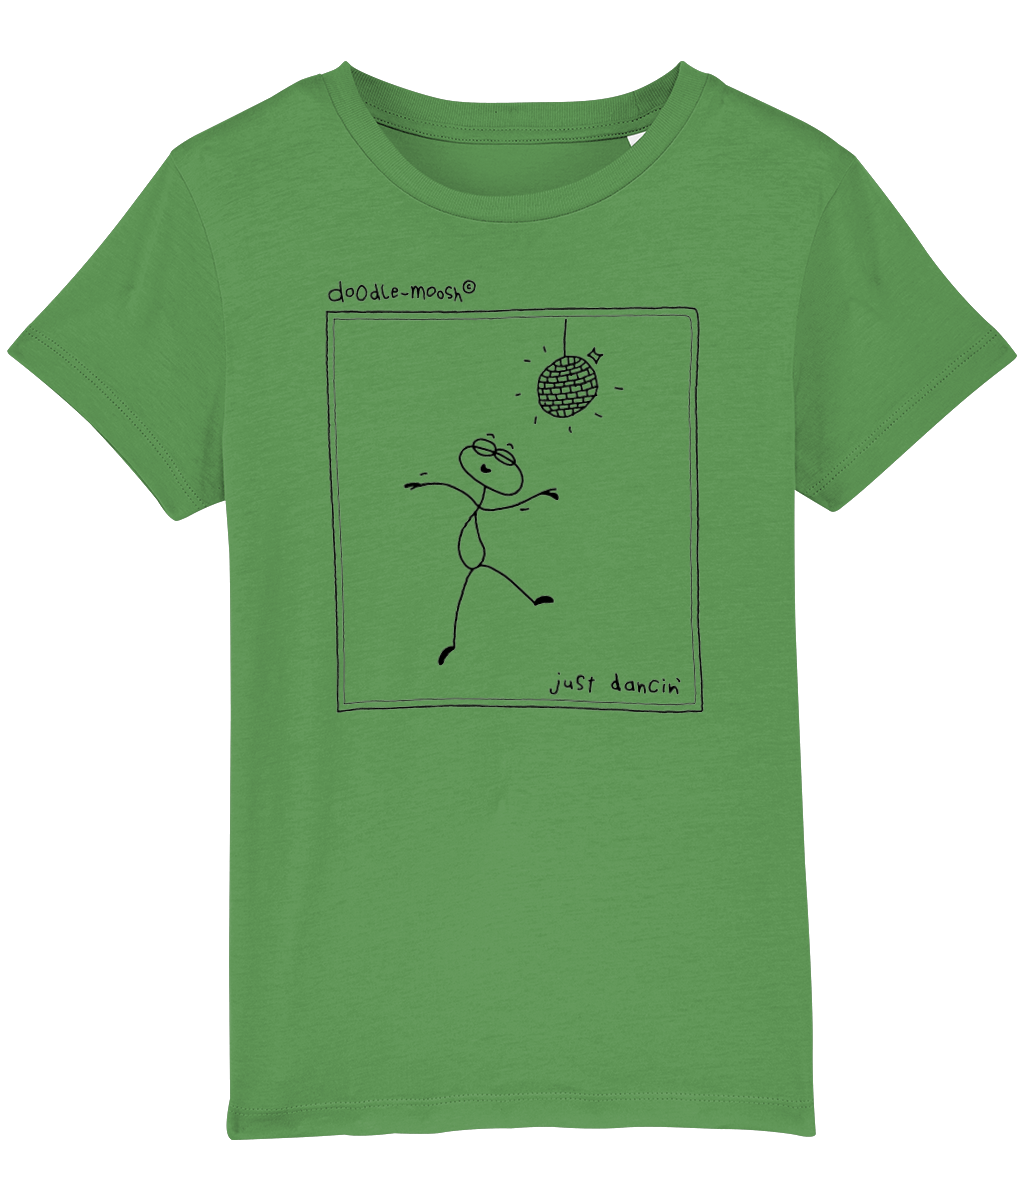 Just dancing t-shirt, green with black